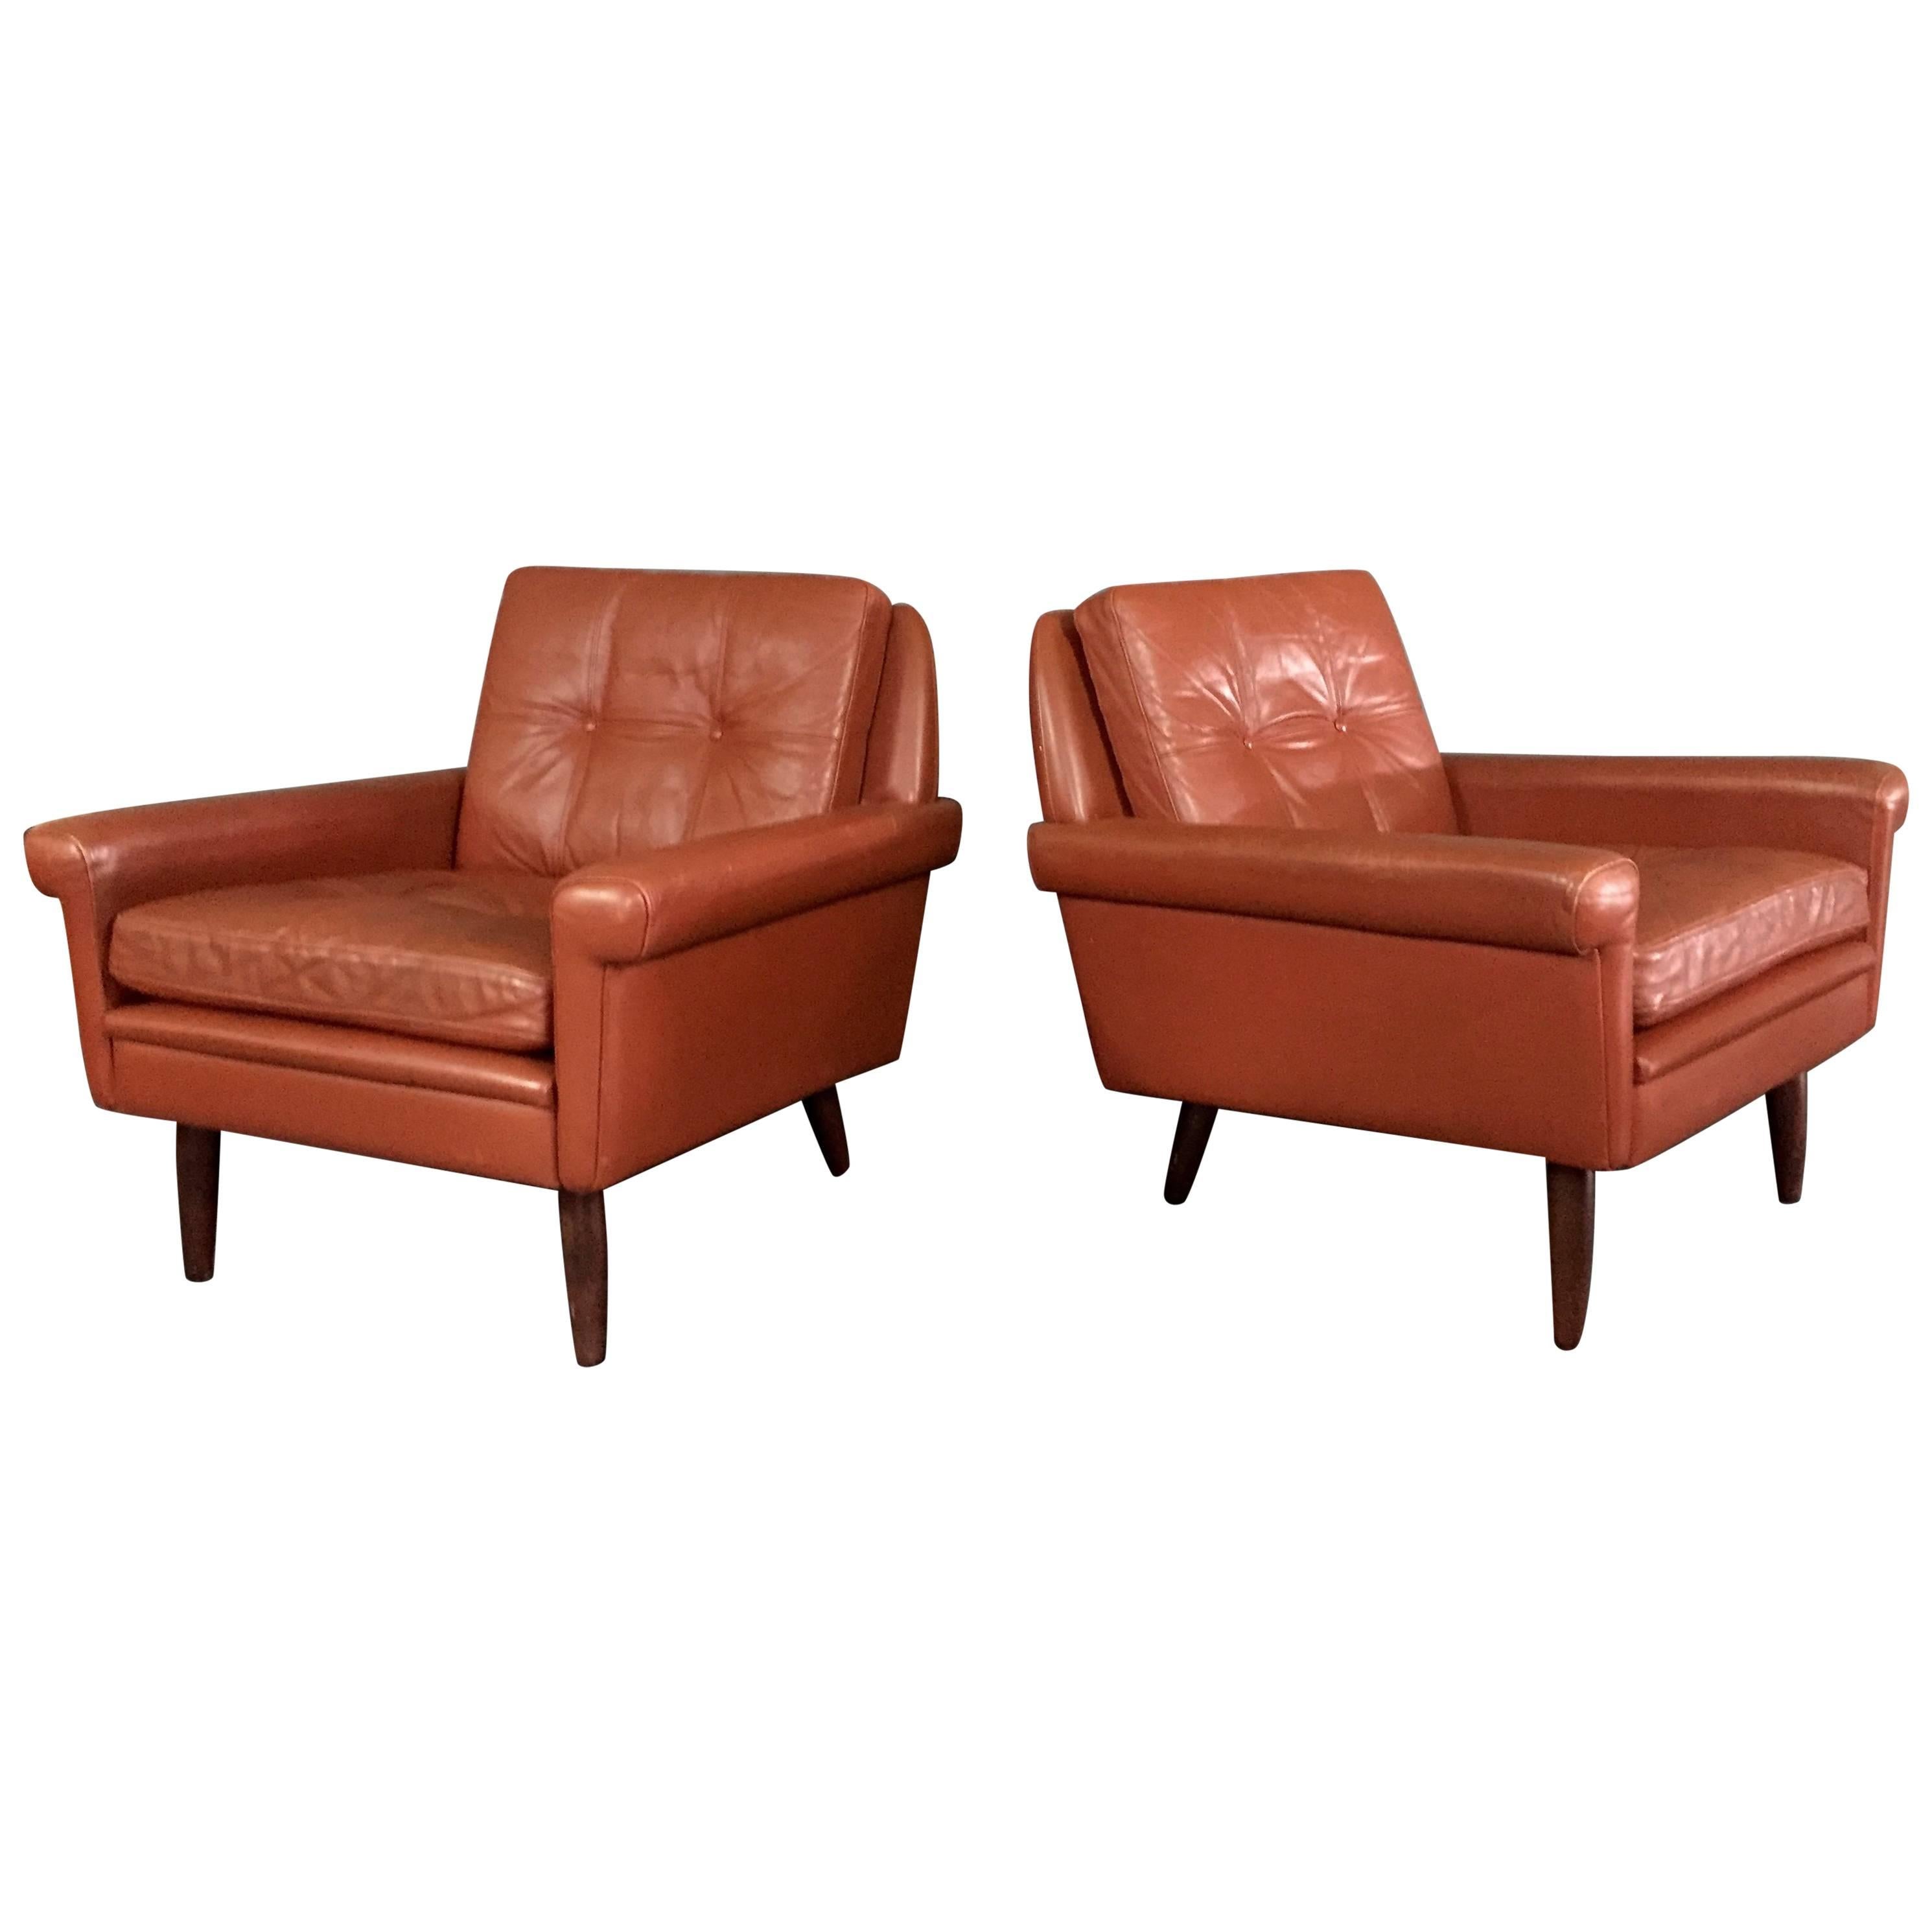 Pair 1960s Danish Leather Lounge Chairs For Sale